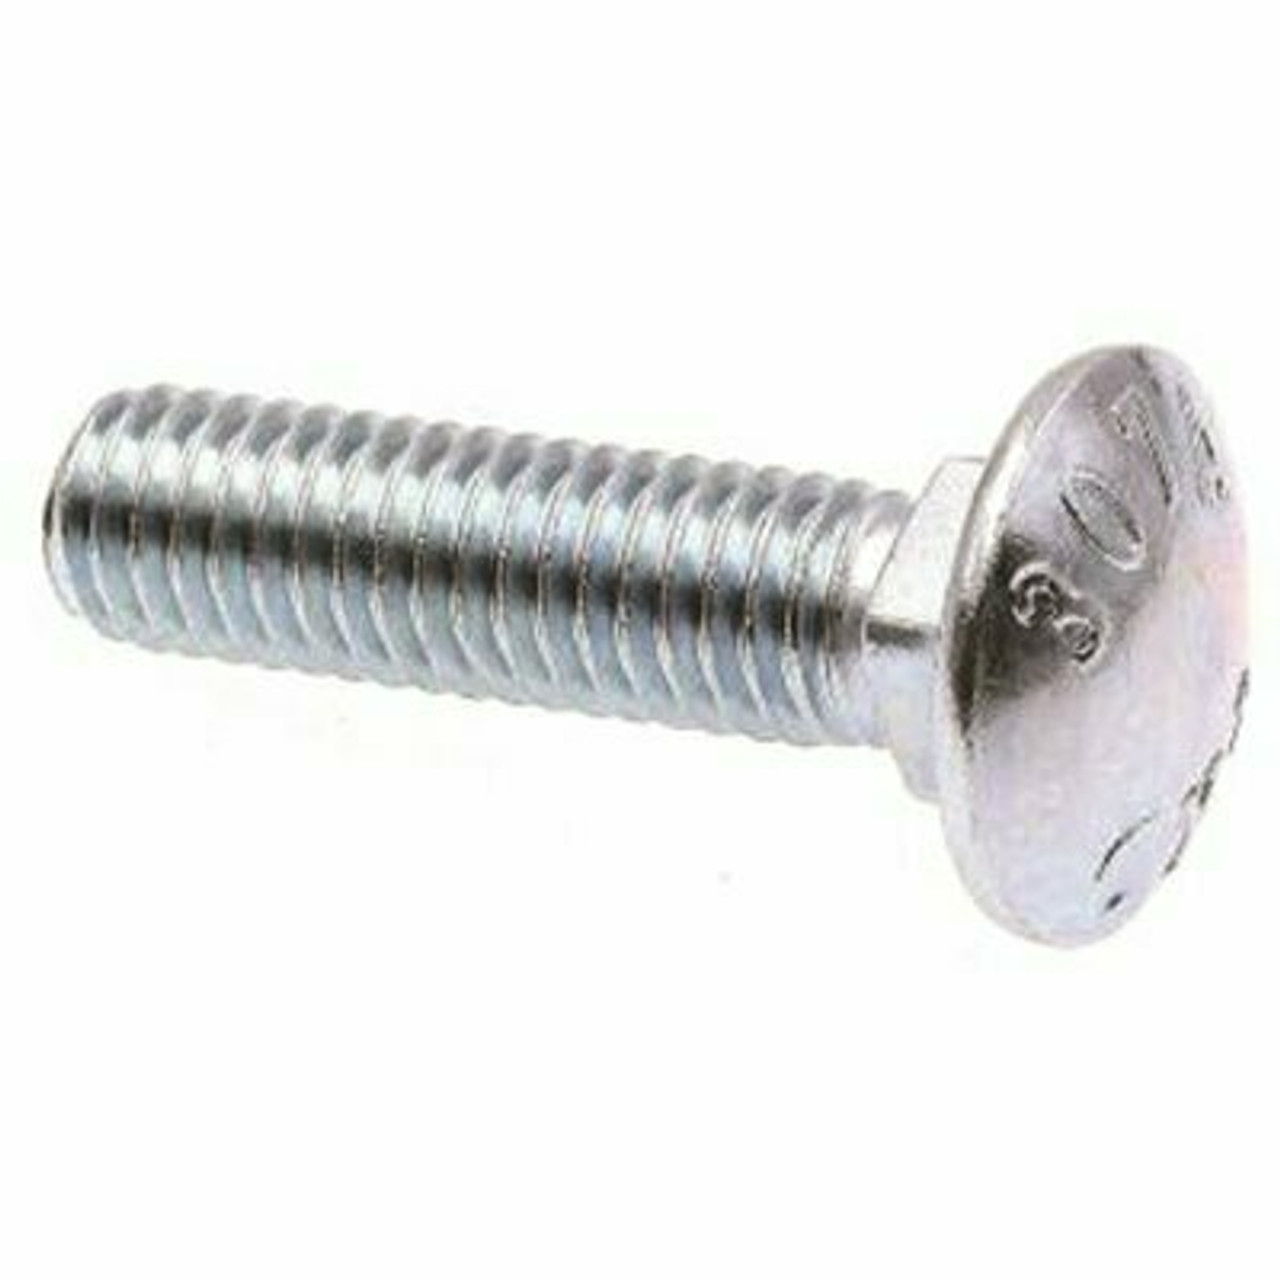 1/4 In.-20 X 1 In. Zinc Plated Carriage Bolts (100 Per Pack)